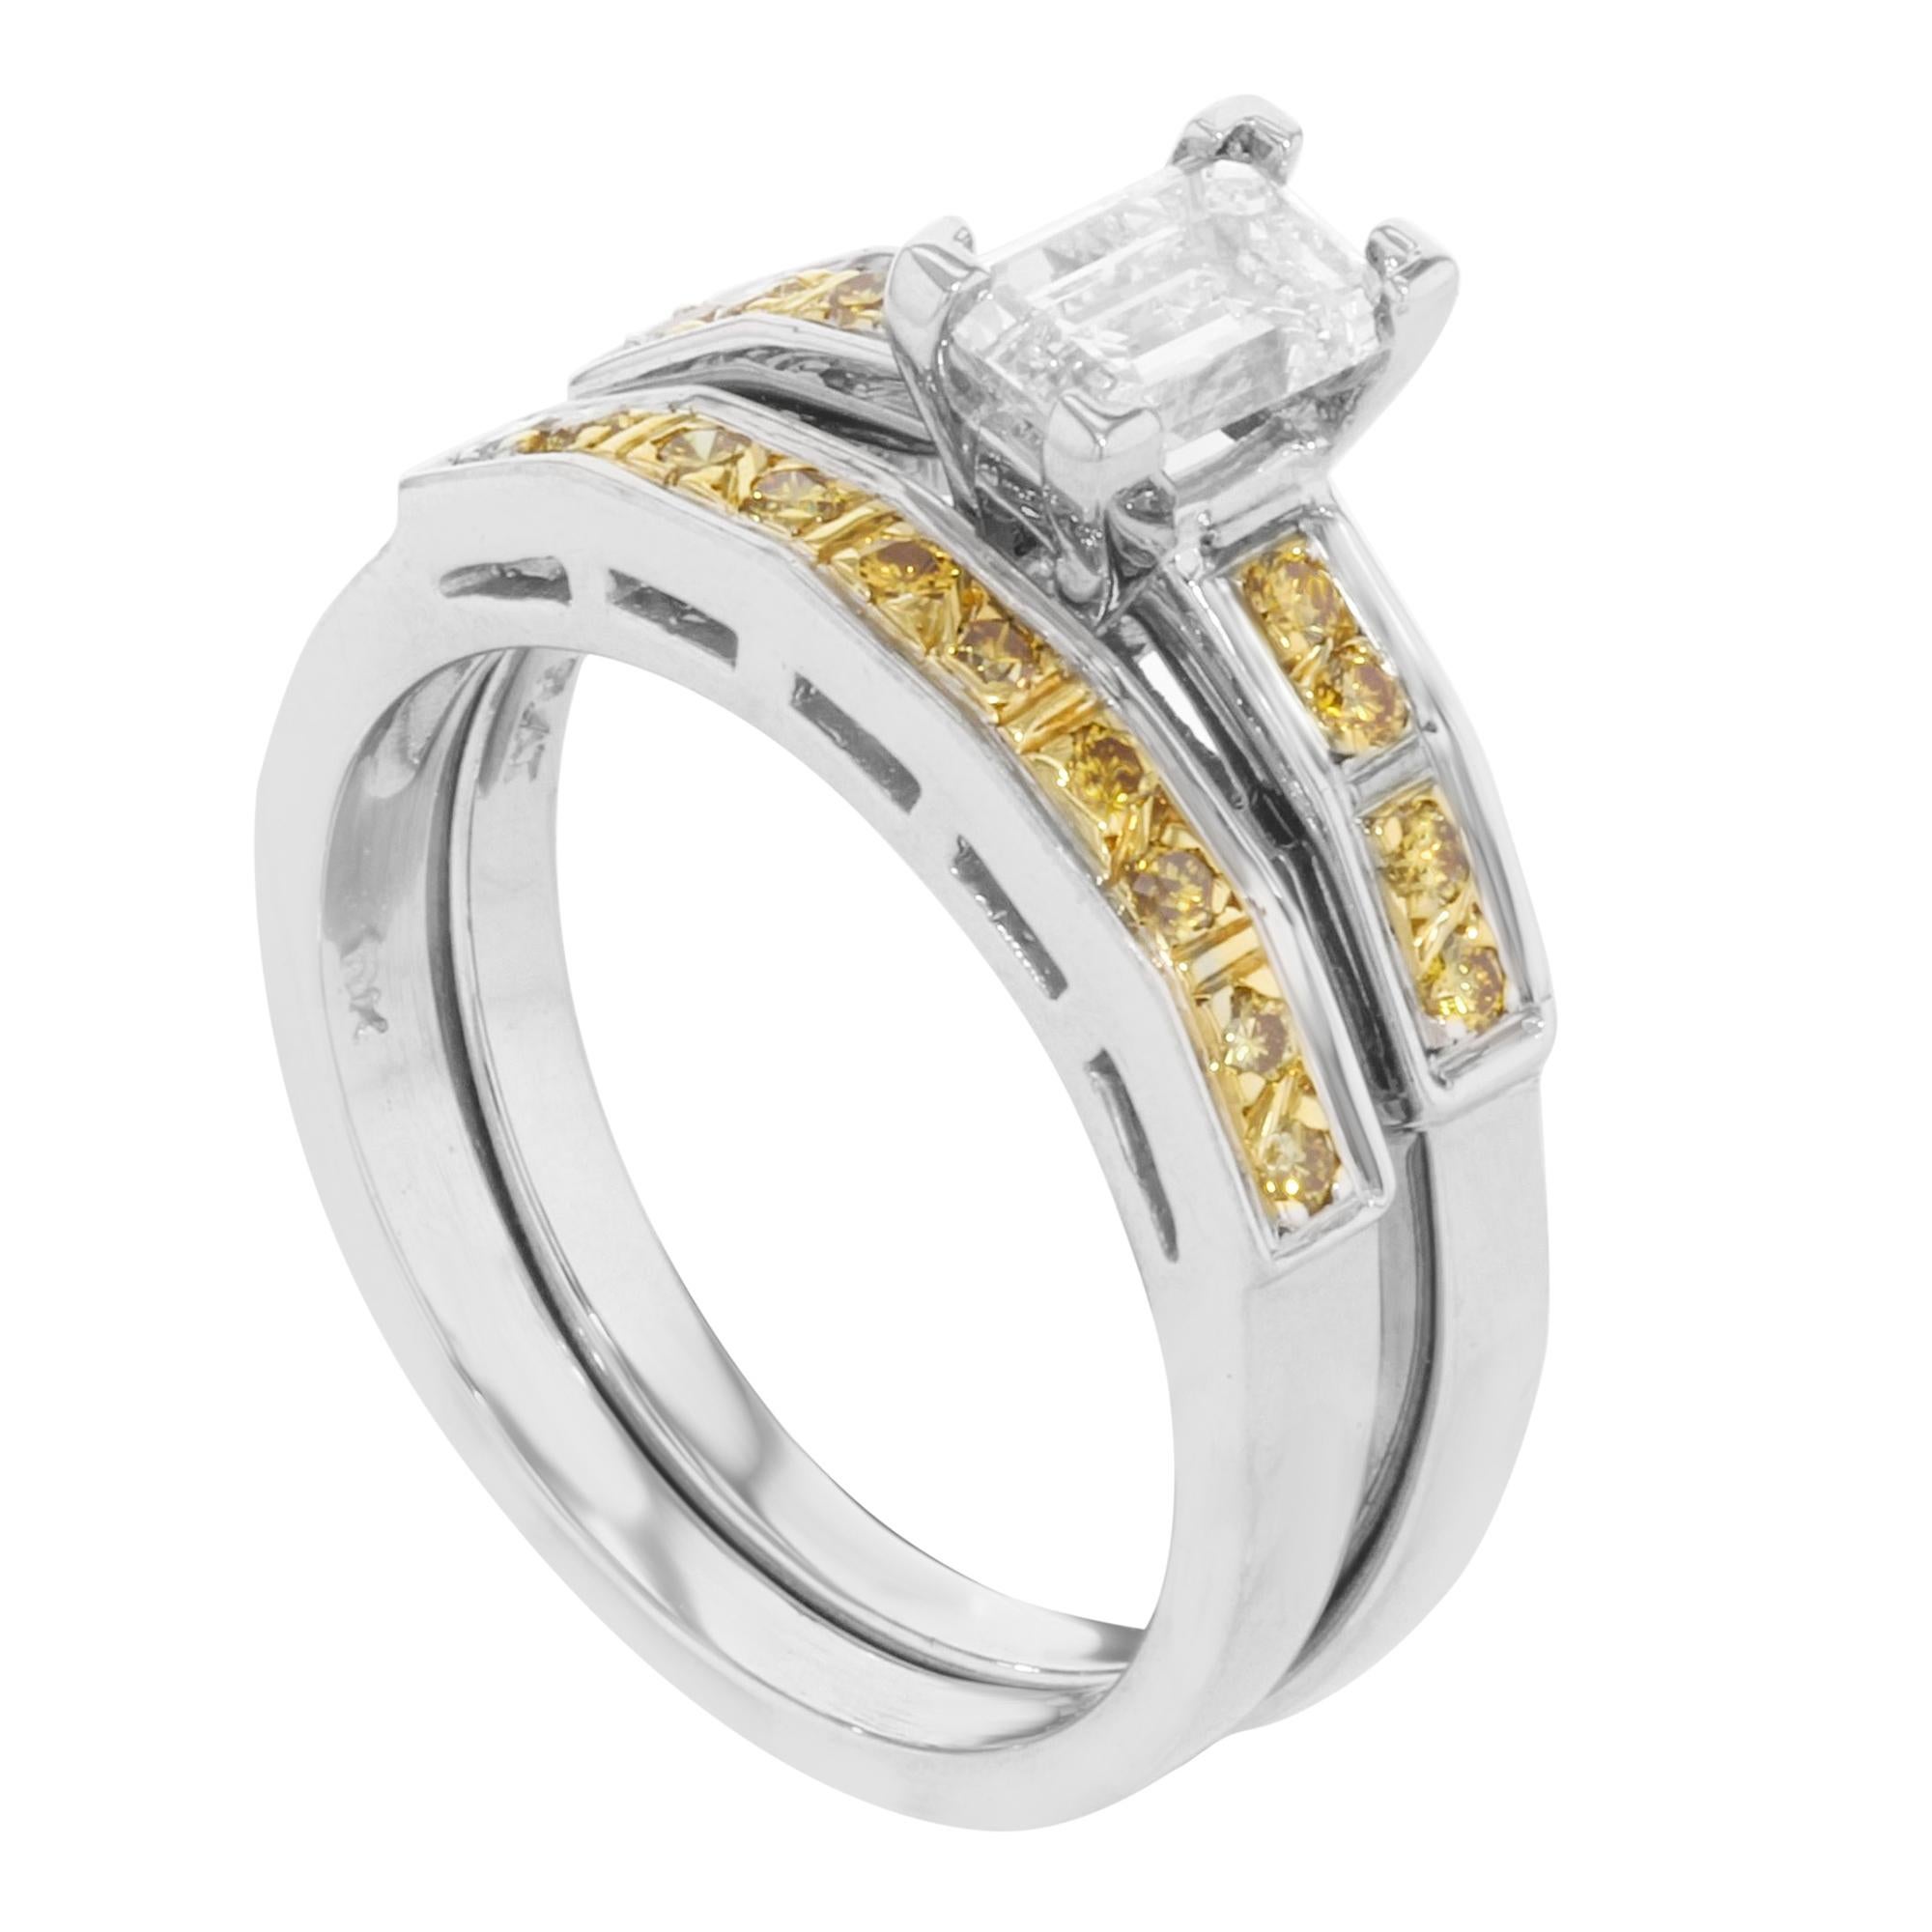 This 2 piece engagement ring set is crafted in 18K yellow gold and platinum. Center emerald cut diamond weighs approx. 0.66 cttw. Accent stones are round cut yellow diamonds weighing approx. 1.65 cttw. Wedding band is encrusted with 10 round cut